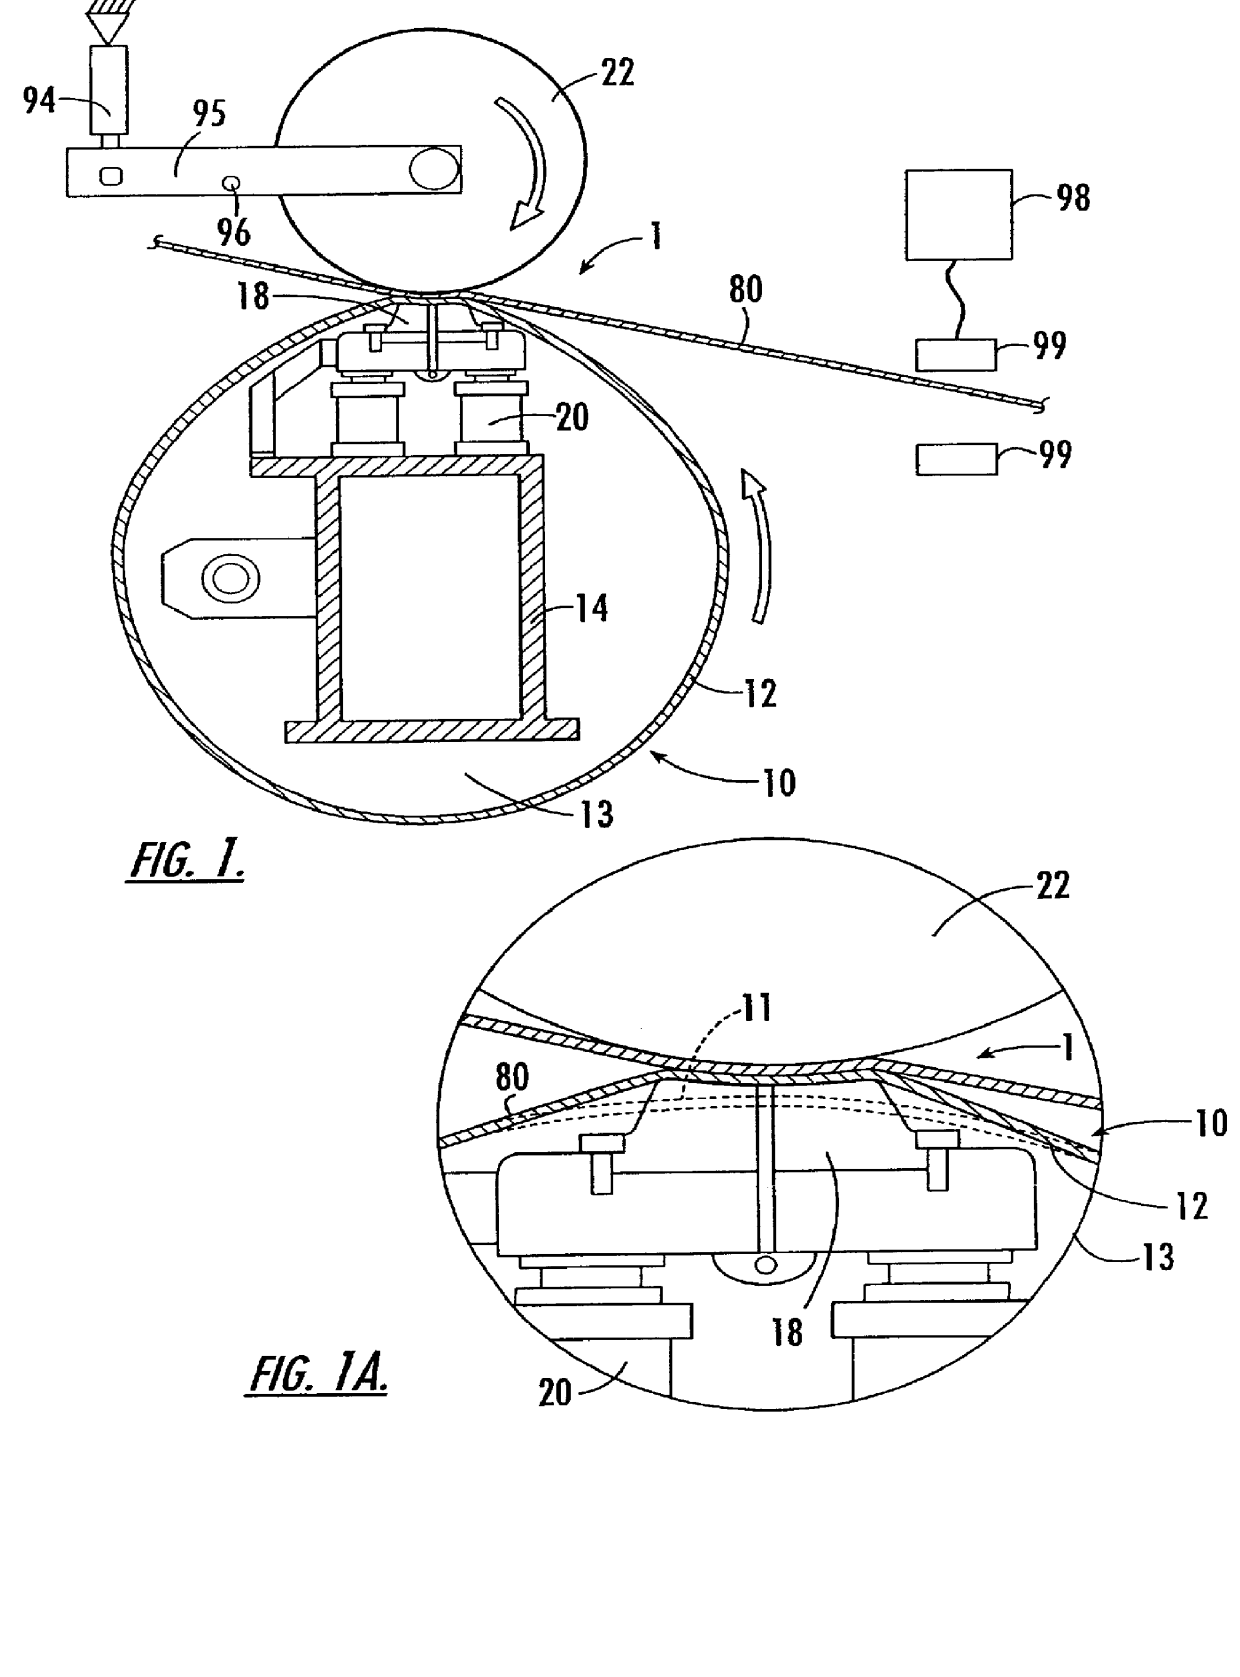 Apparatus for calendering paper